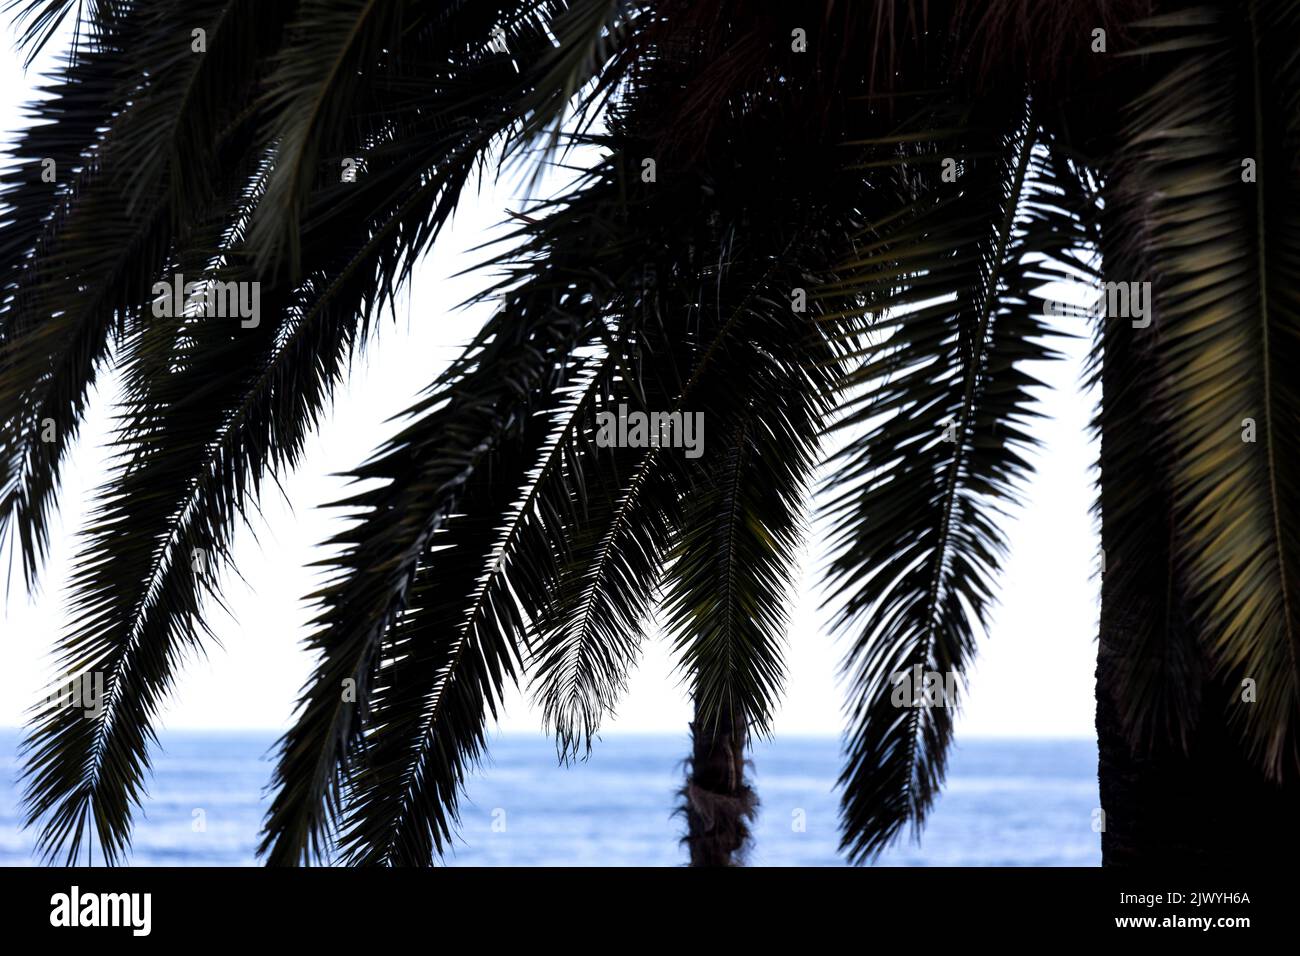 a palm tree shade at the seaside Stock Photo